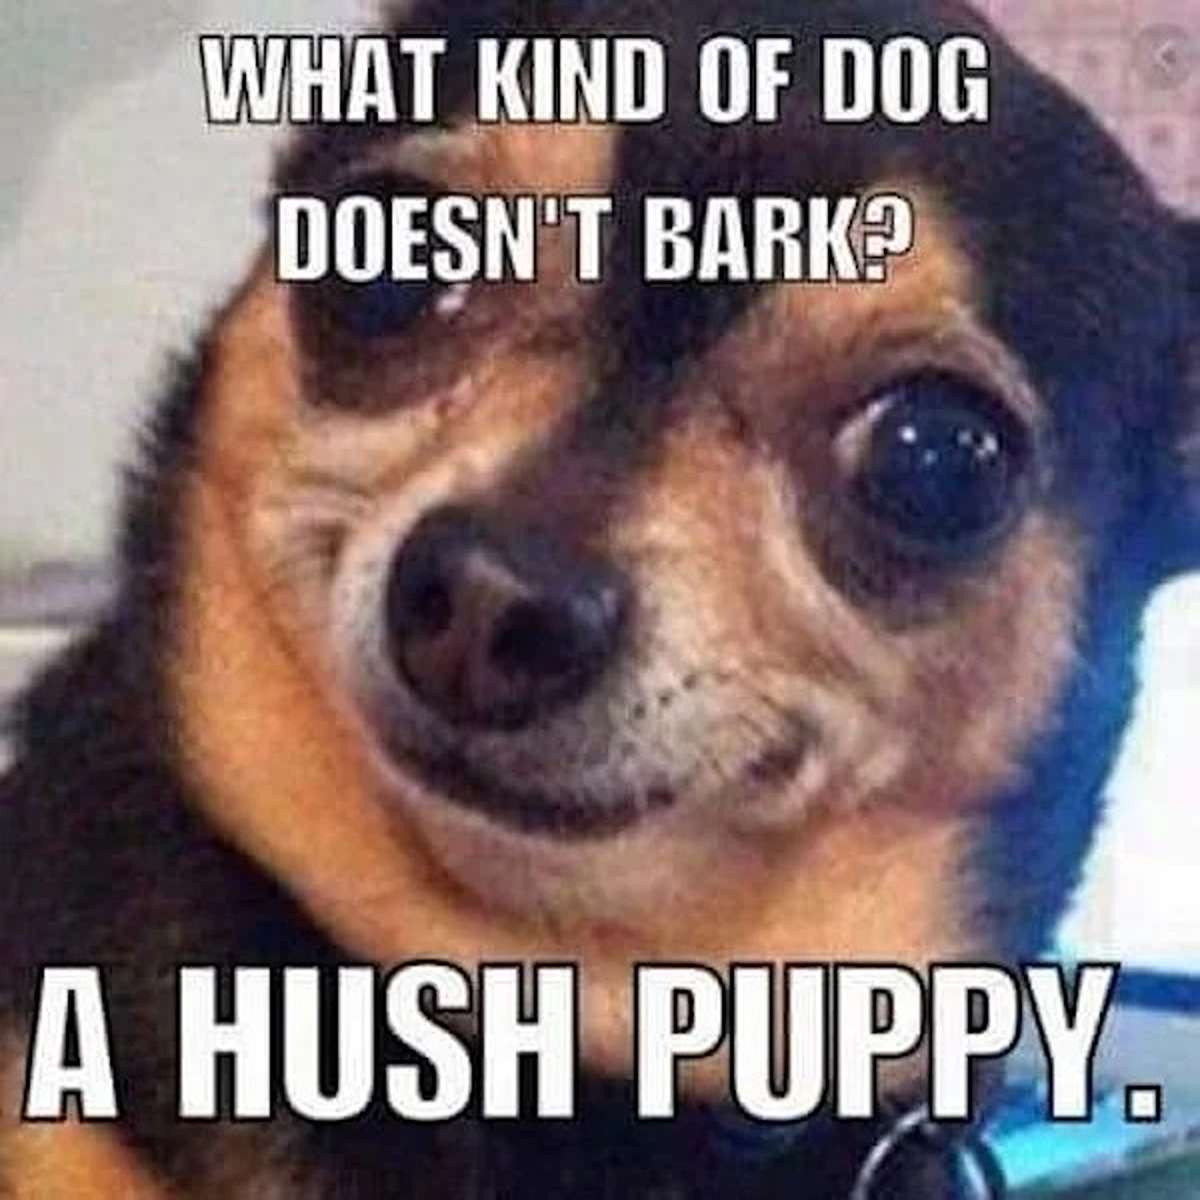 fresh memes - funny meme puns - What Kind Of Dog Doesn'T Bark? 11 A Hush Puppy.